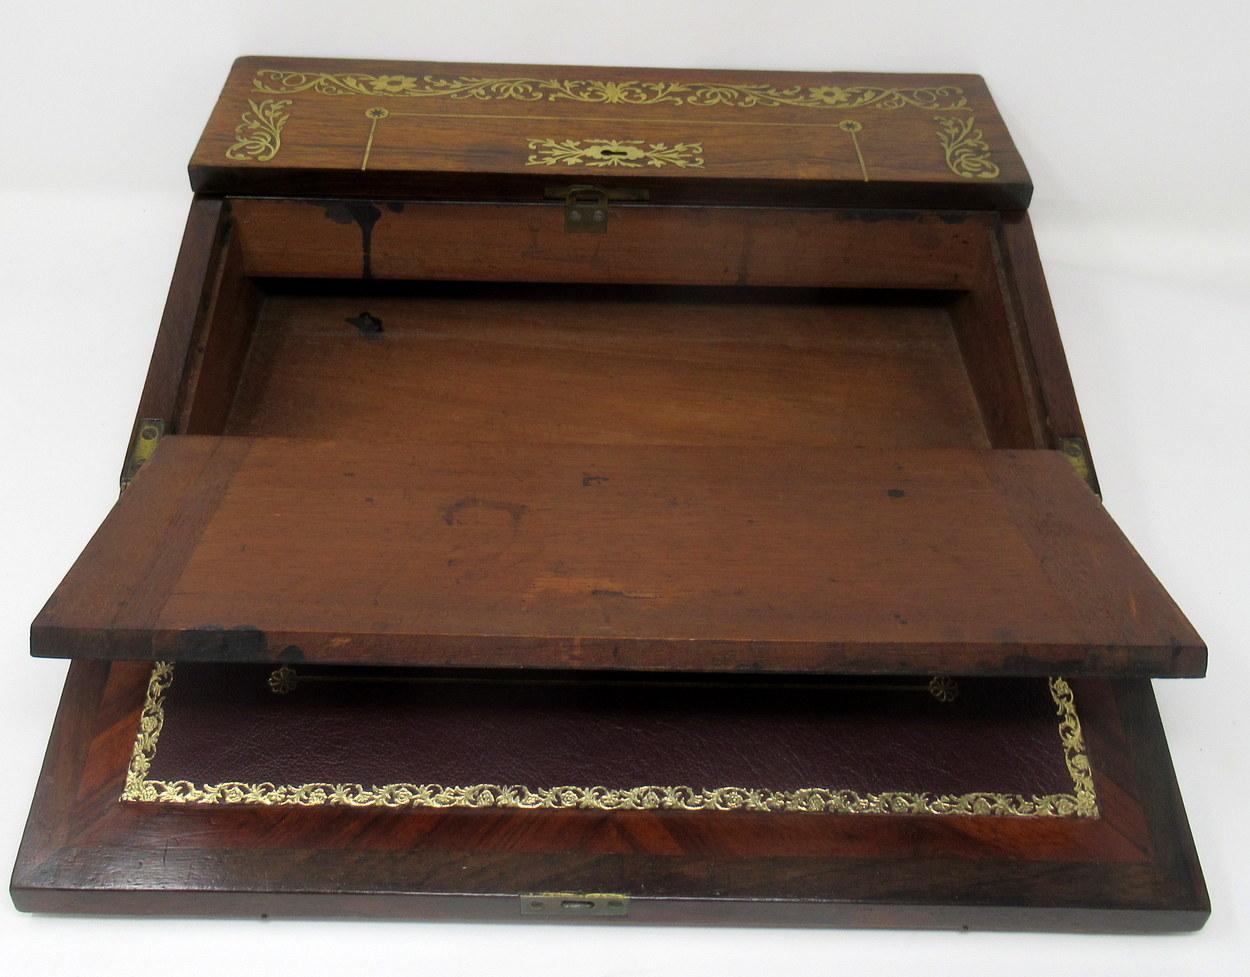 Polished French English Rosewood Brass Inlaid Boulle Writing Slope Box Desk, 19th Century